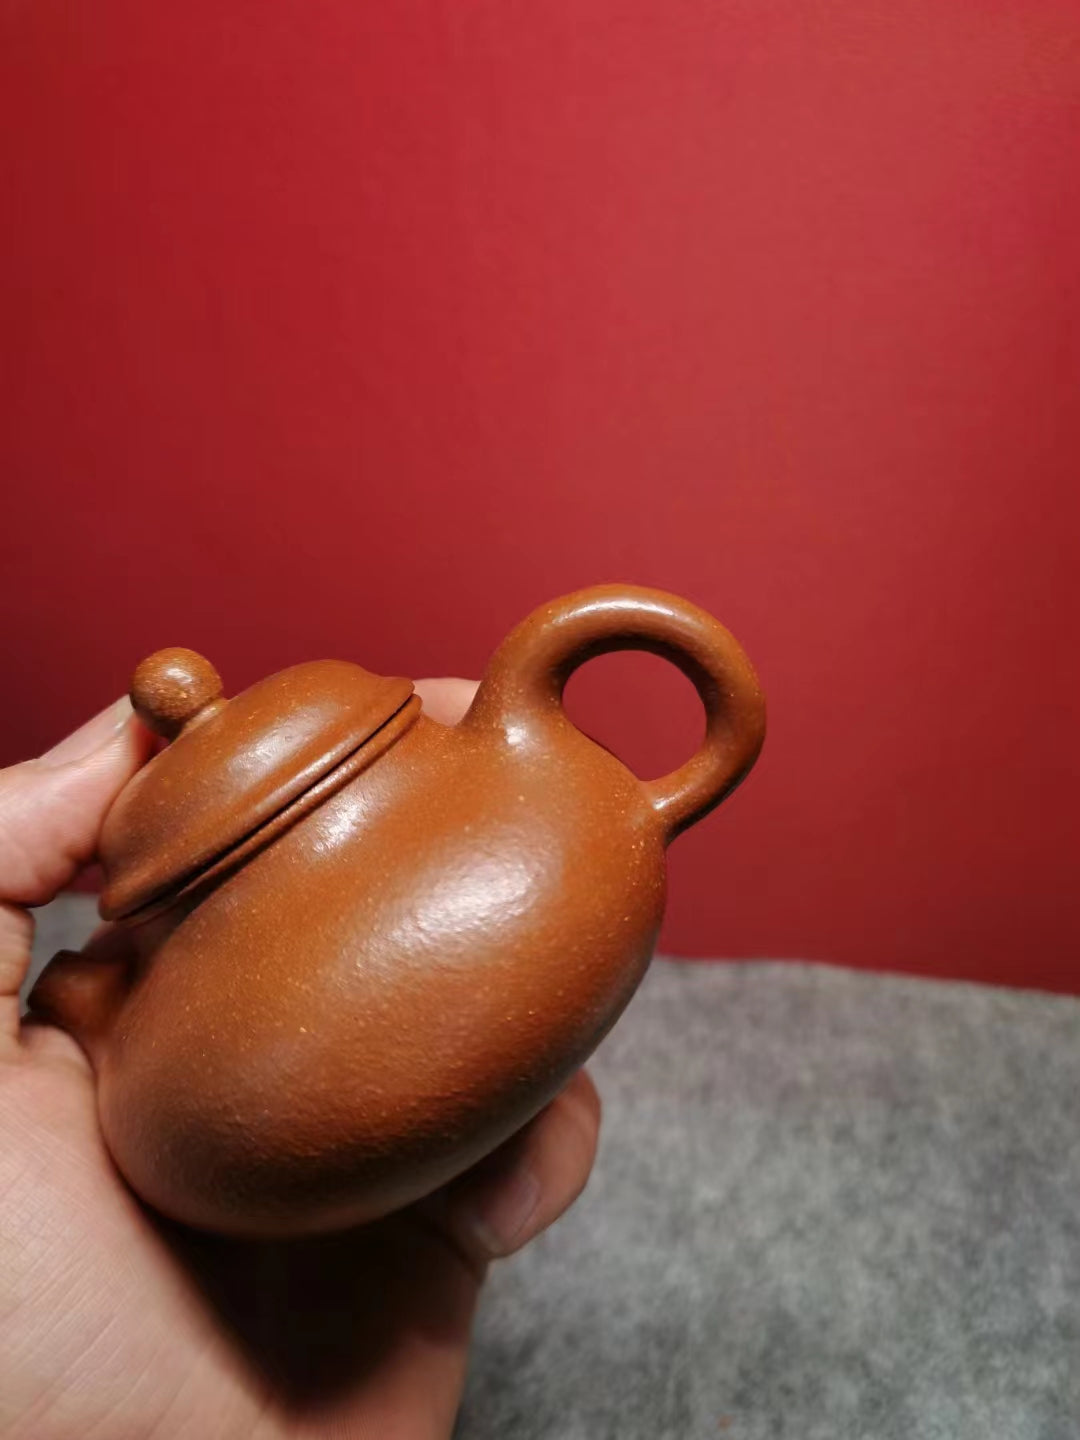 The purple clay teapot made of red purple clay has a capacity of 130cc